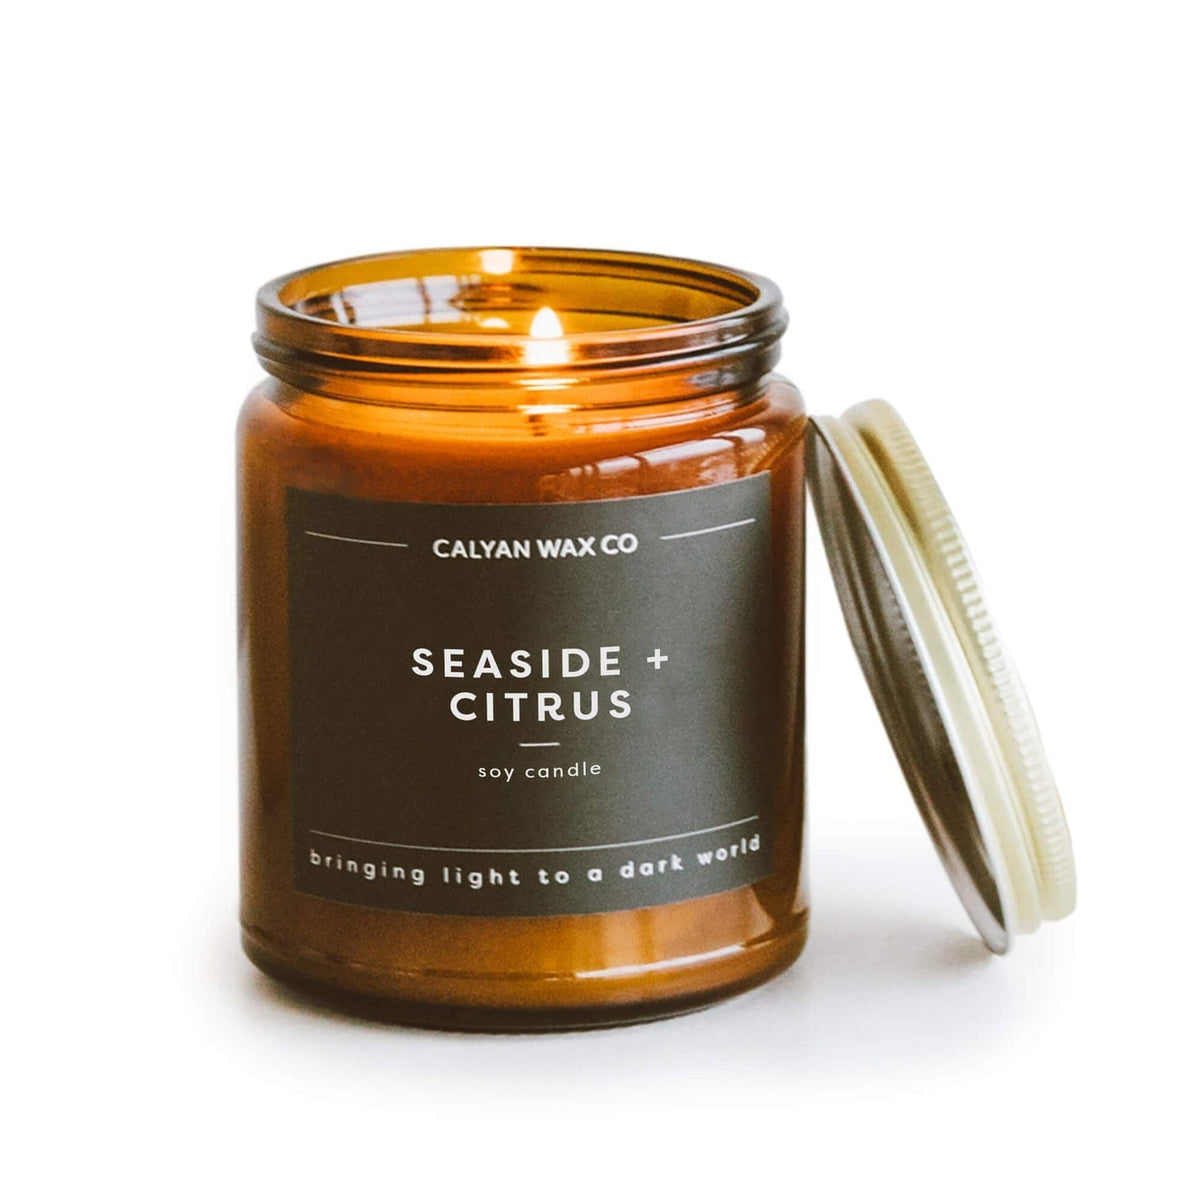 Calyan Wax Co. Seaside + Citrus Soy Candle